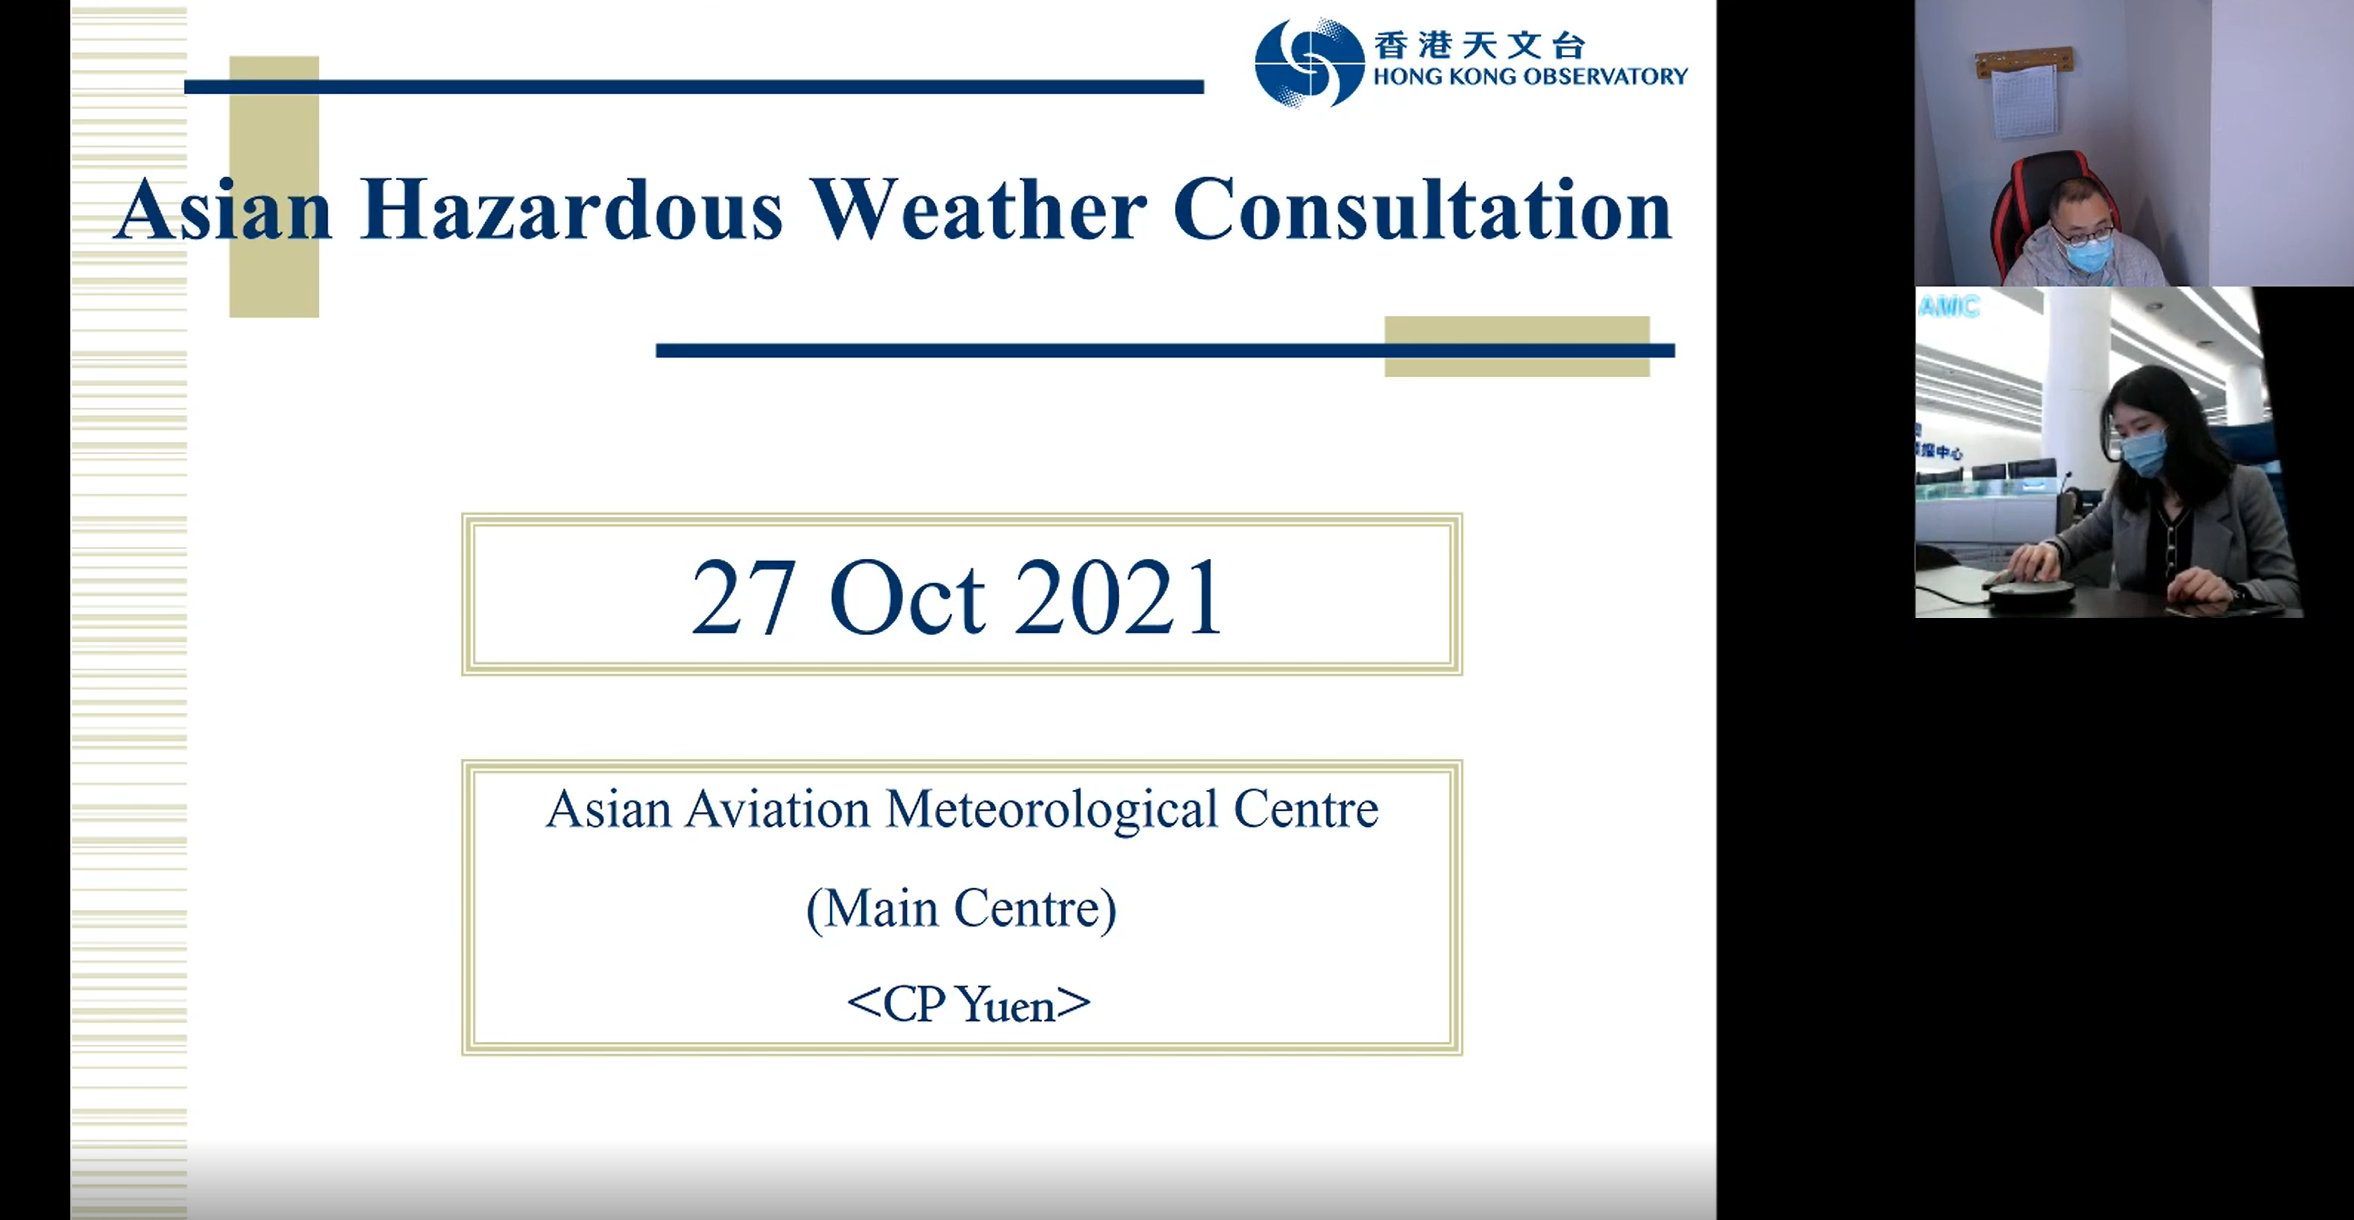 The Observatory steps in to cover the work of the main centre of the Asian Aviation Meteorological Centre